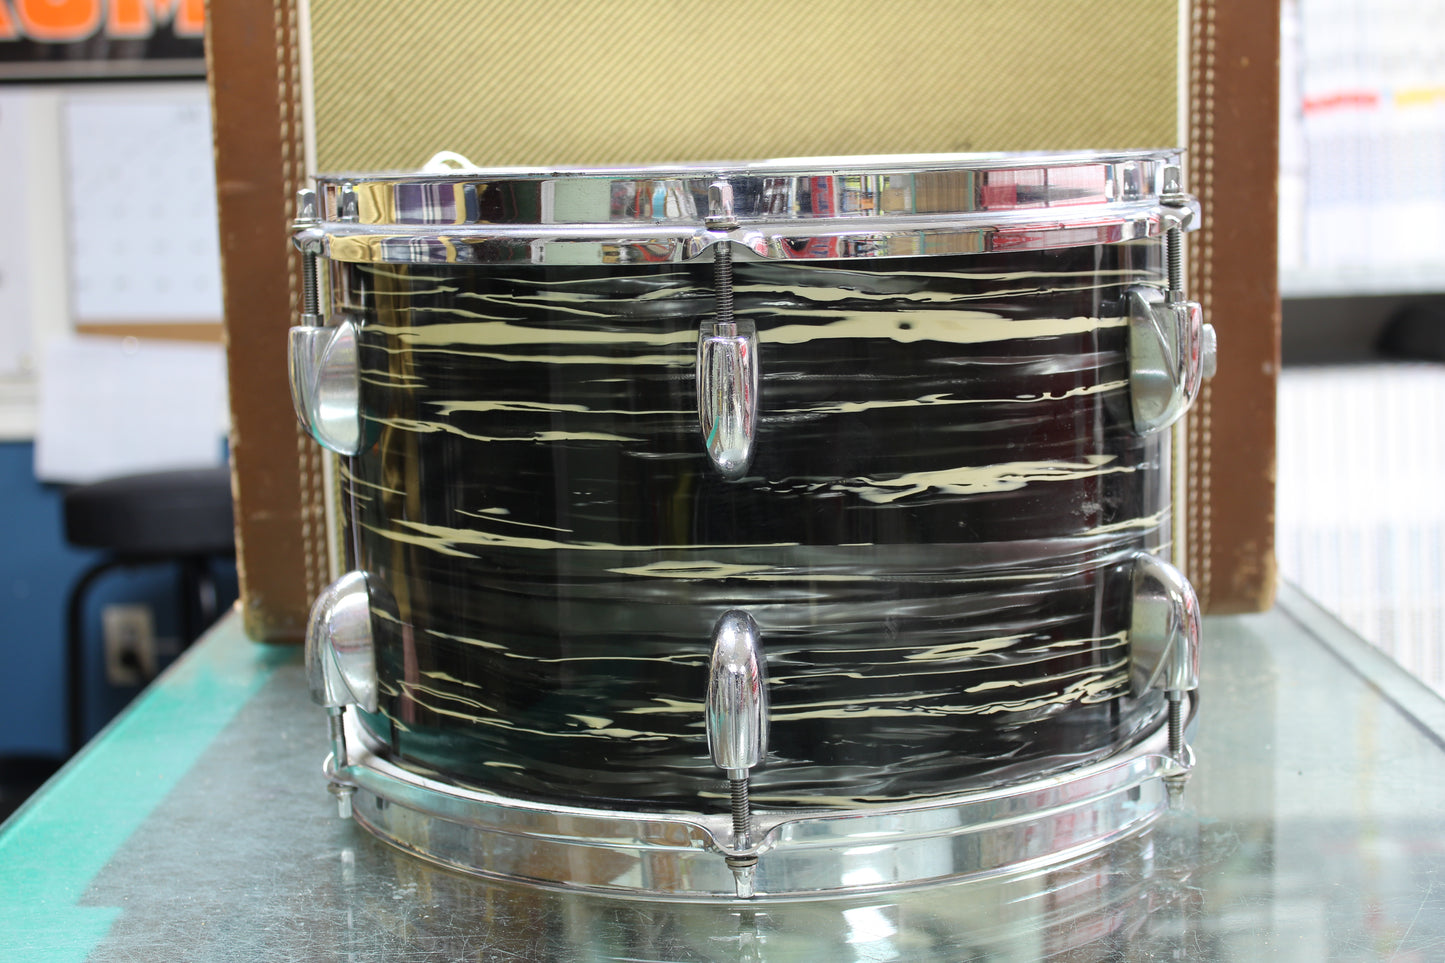 1960's Walberg and Auge 8"x12" Perfection Tom in Black Oyster Pearl